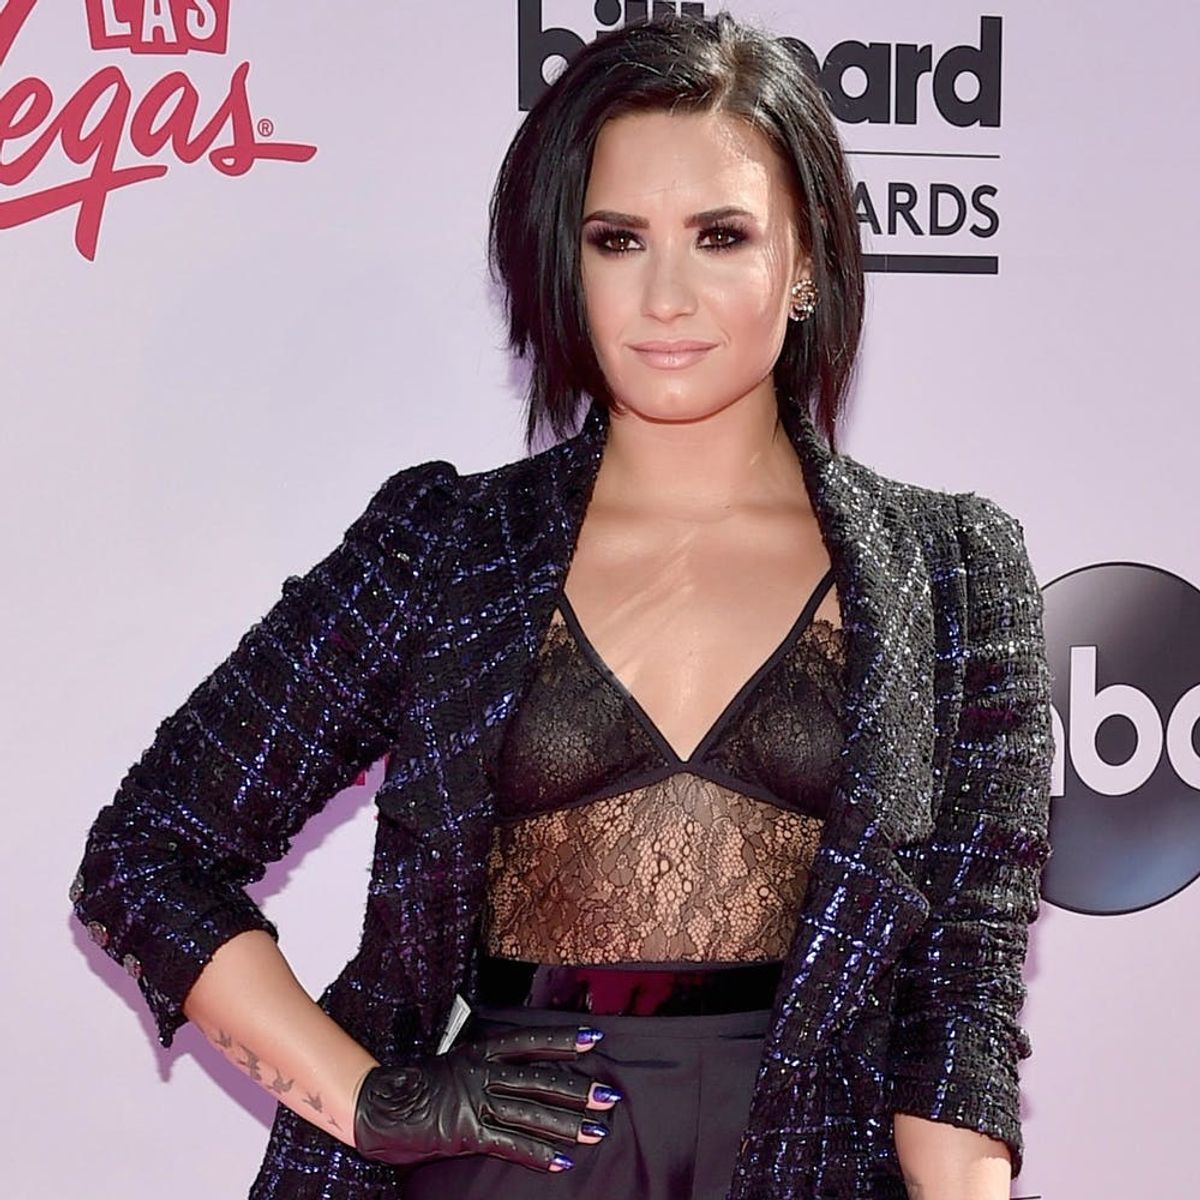 See Which Star Was Twinning With Demi Lovato on the Billboard Music Awards Red Carpet